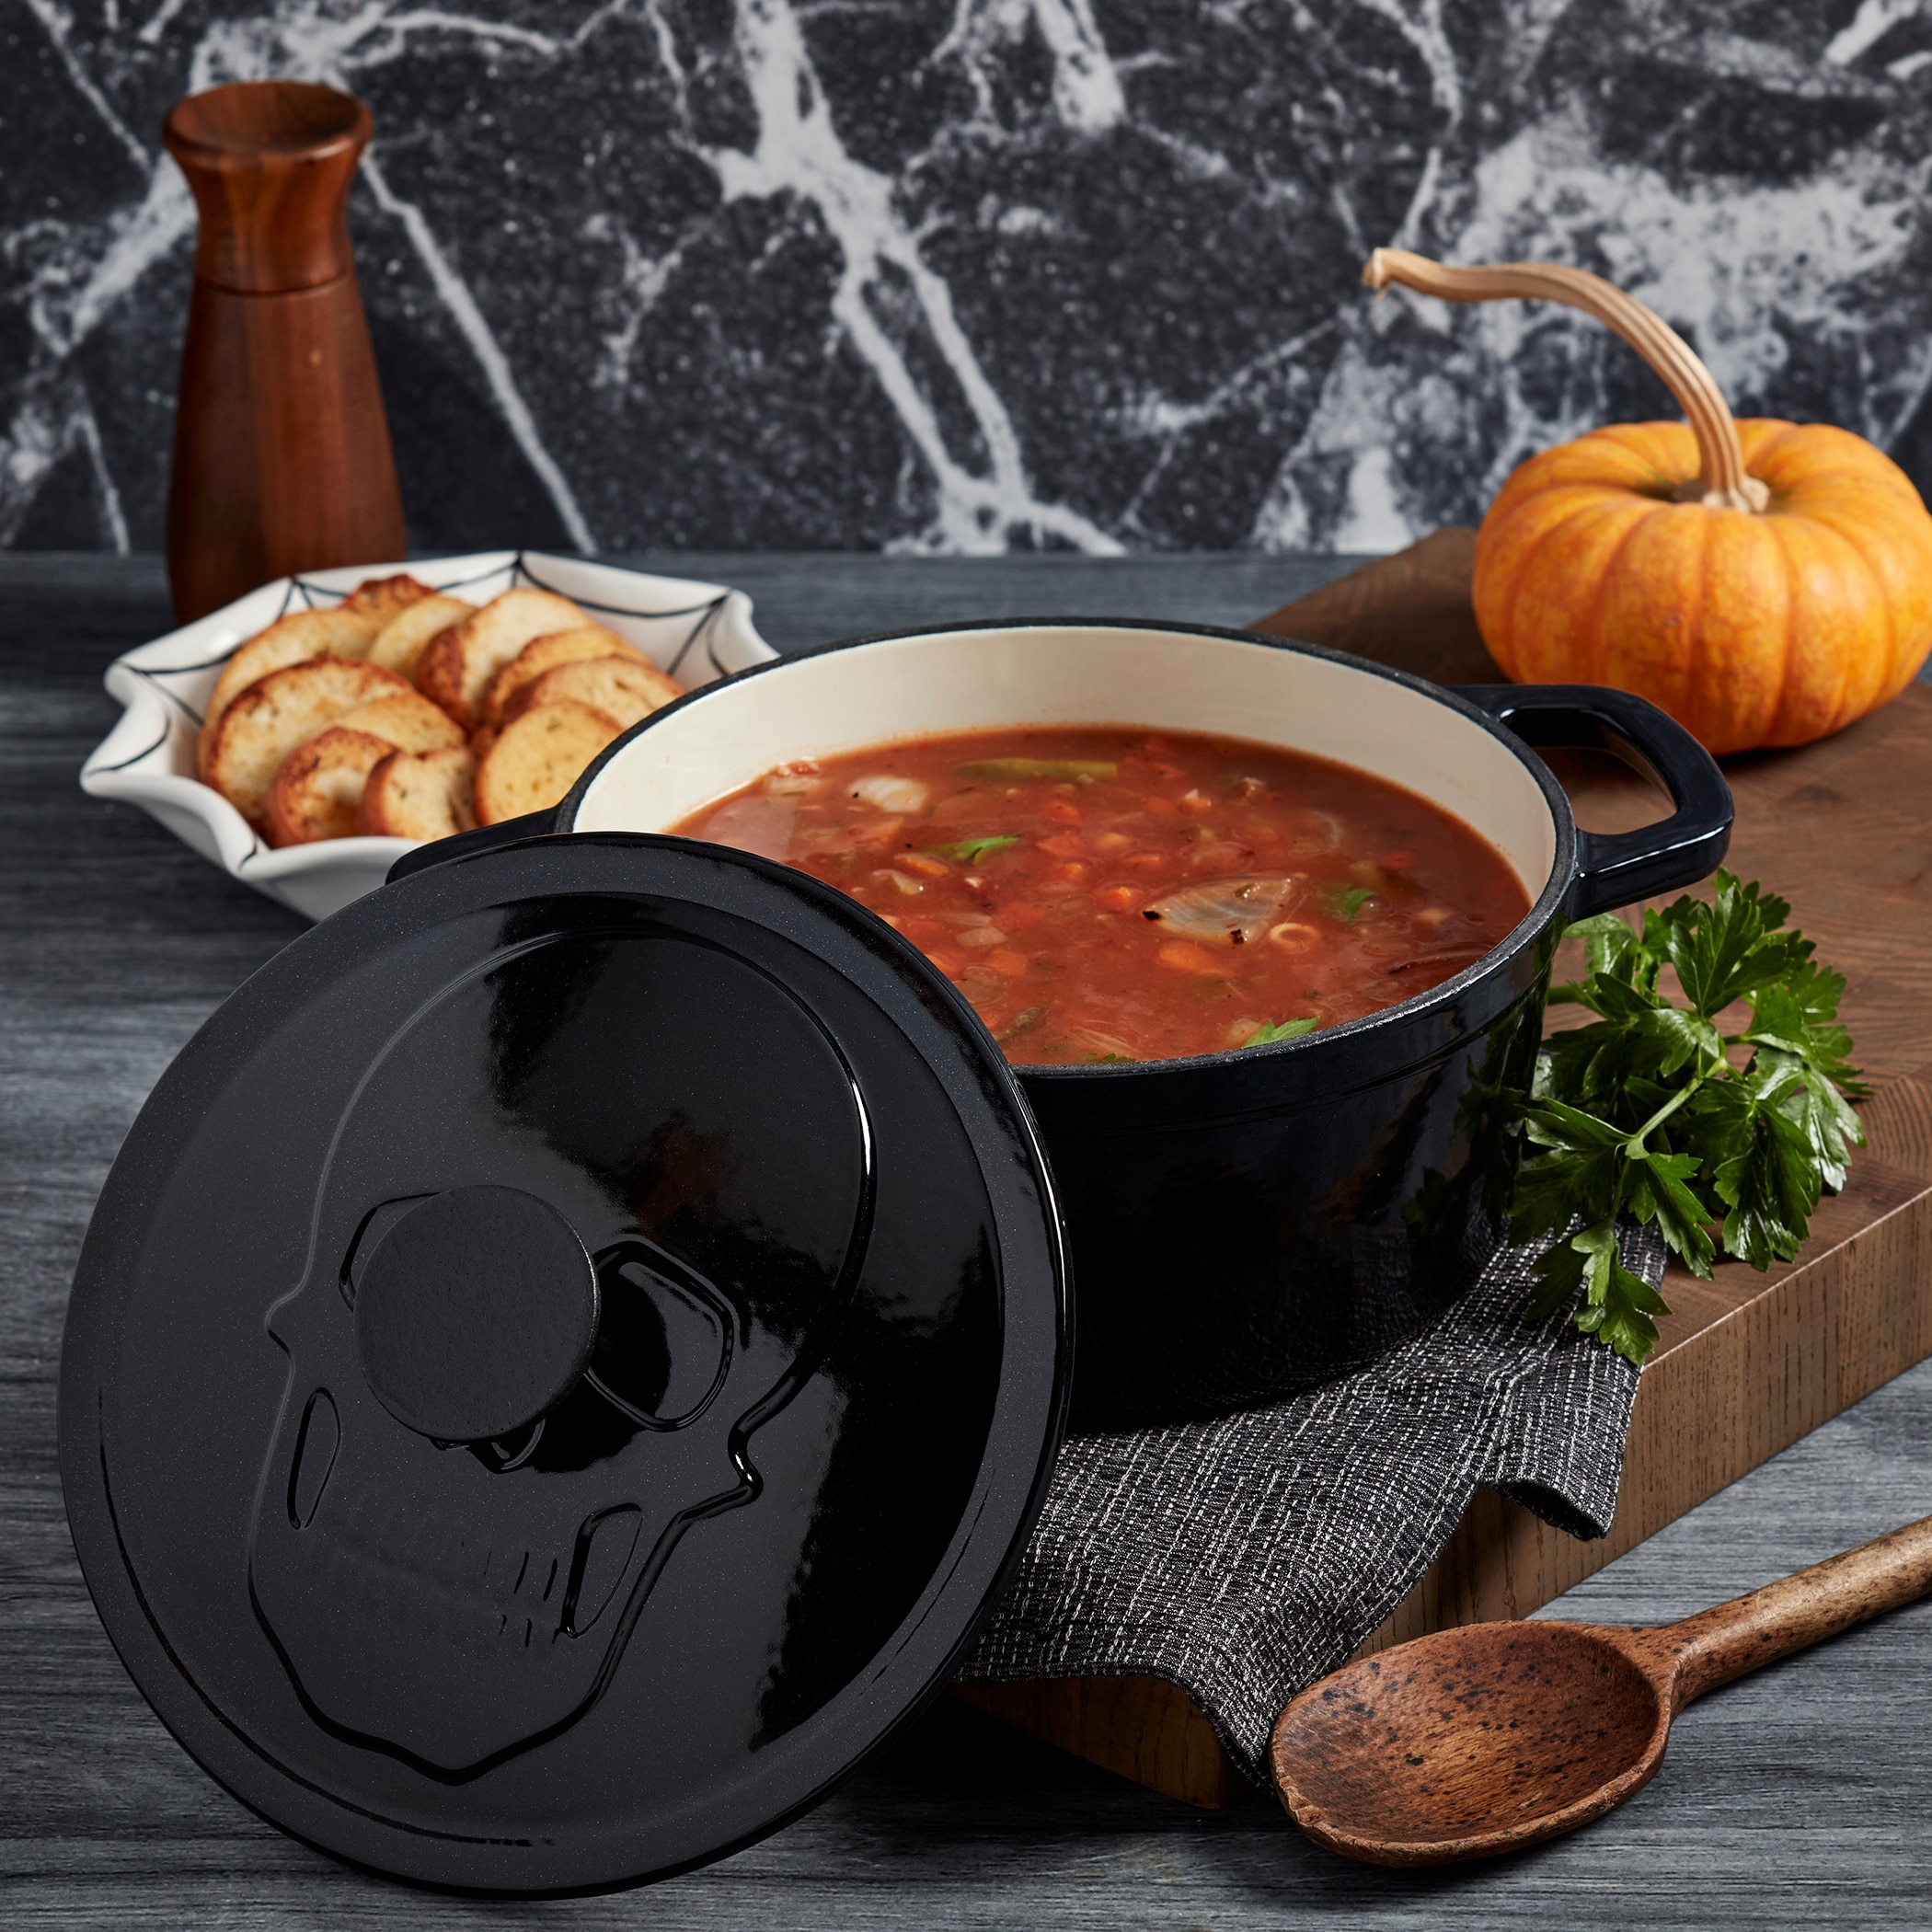 https://ak1.ostkcdn.com/images/products/is/images/direct/b219ada2e32850d3671569433c61e3d319c3db8f/3qt-Enamel-Cast-Iron-Covered-Cast-Iron-w--Skull-embossed-lid.jpg